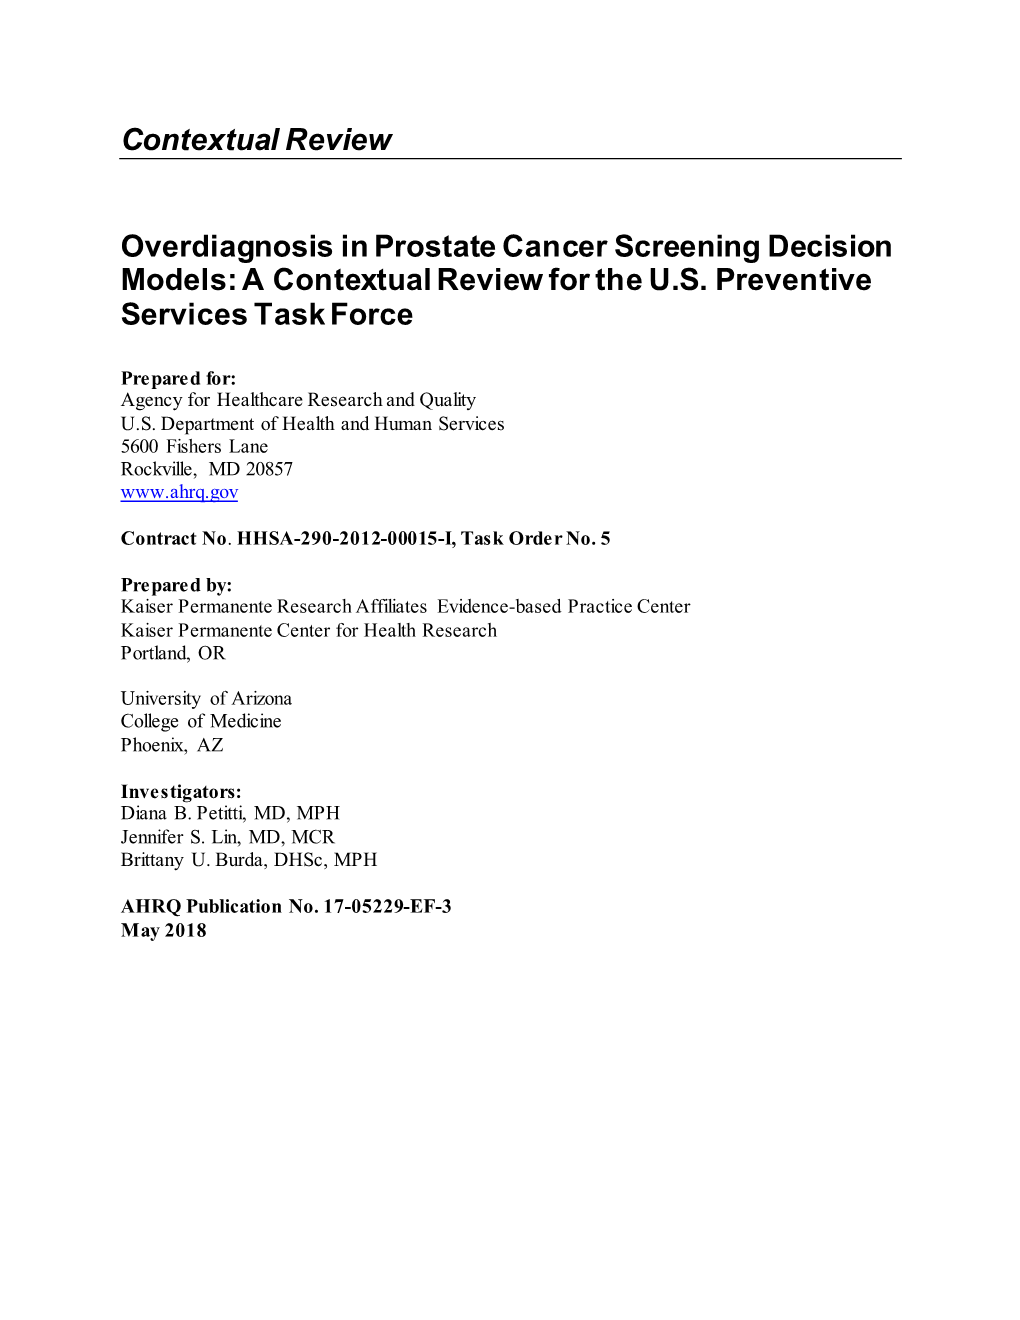 Overdiagnosis in Prostate Cancer Screening Decision Models: a Contextual Review for the U.S